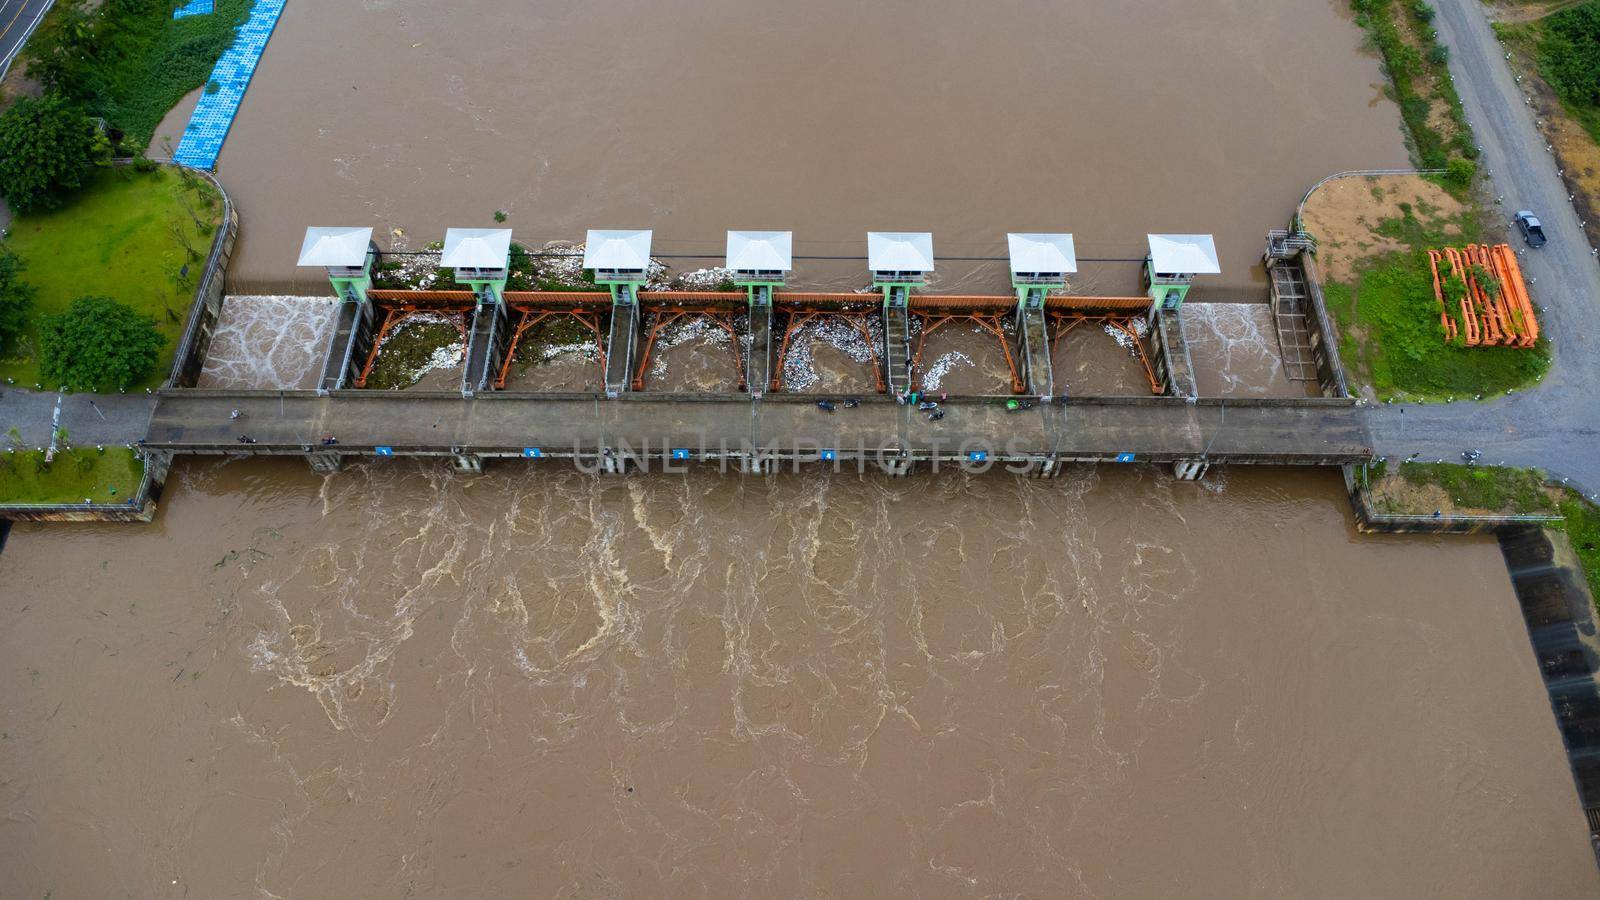 Aerial view of the water released from the concrete dam's drainage channel as the overflow in the rainy season. Top view of turbid brown forest water flows from a dam in rural northern Thailand. by TEERASAK